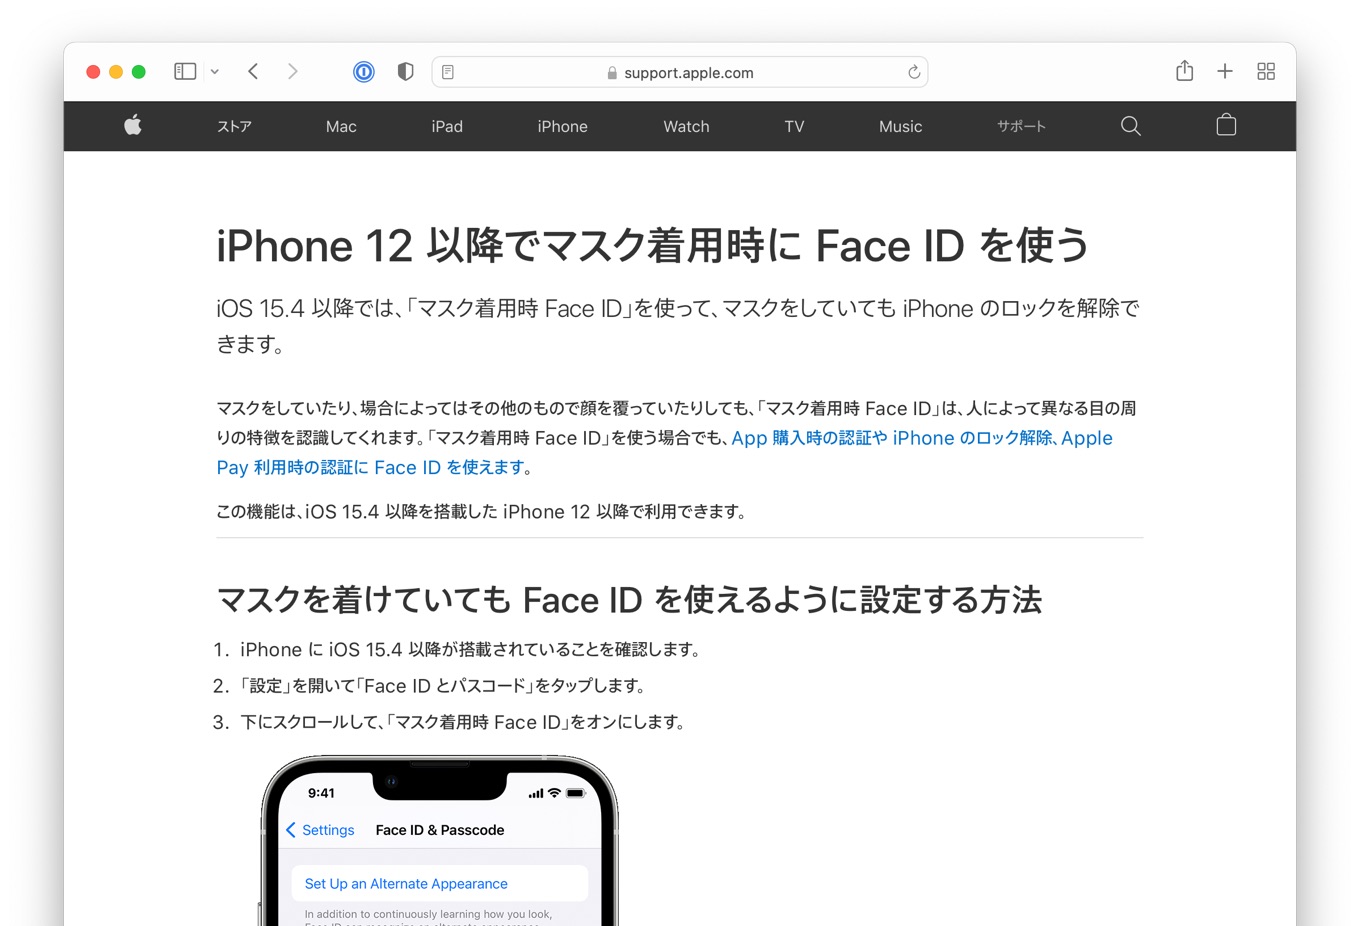 Face ID with a Mask